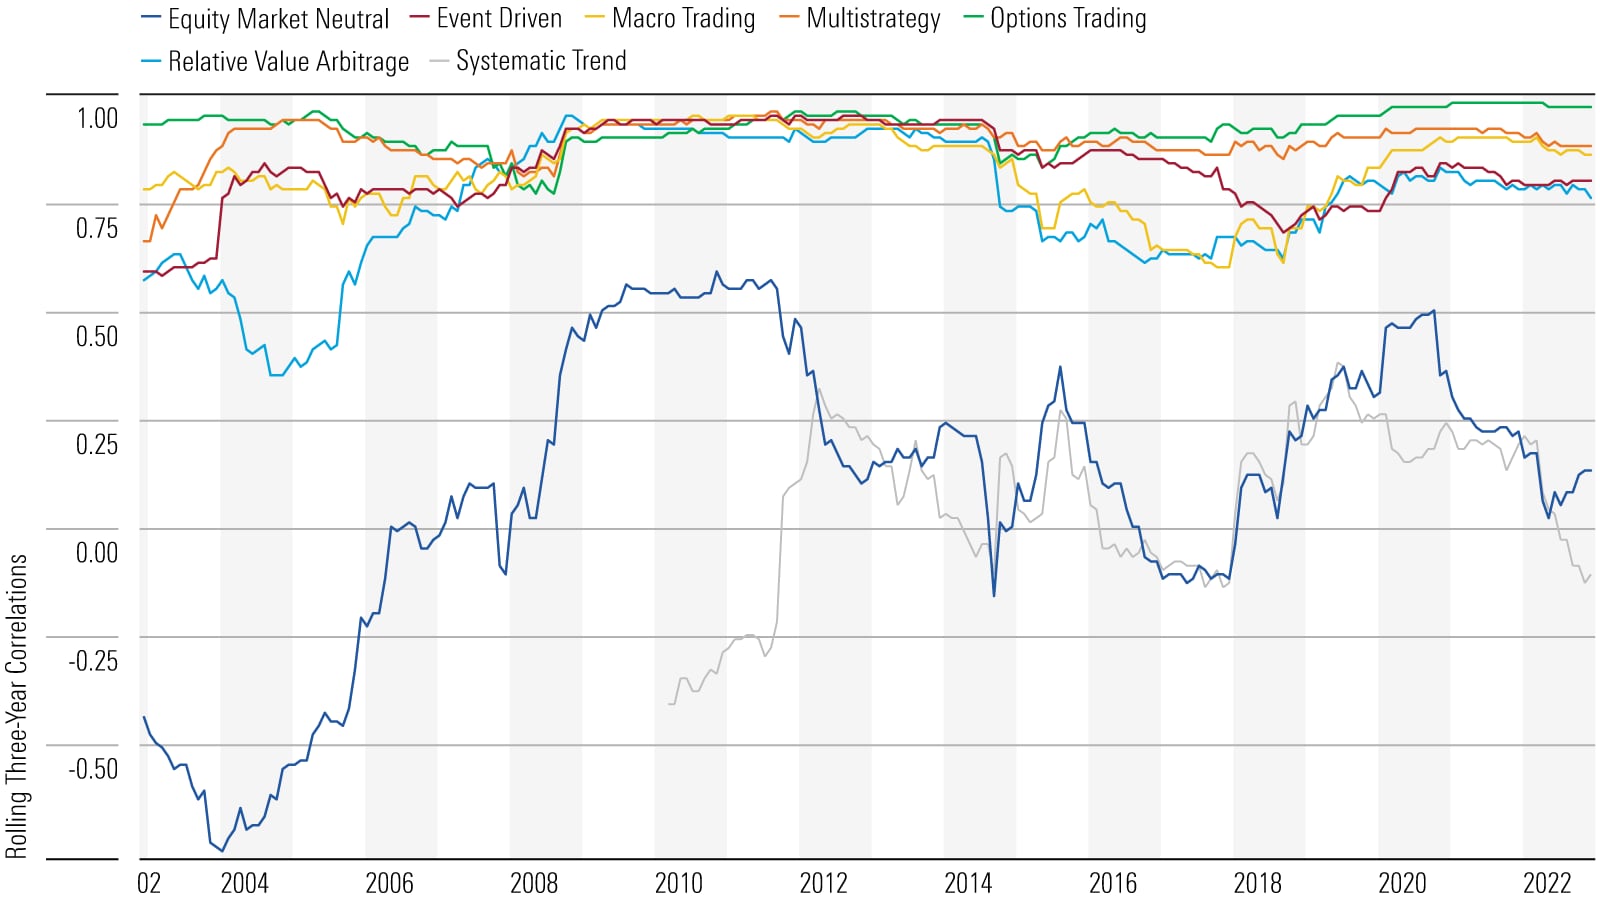 A graph with the rolling three-year correlations of alternative categories versus the Morningstar US Market Index